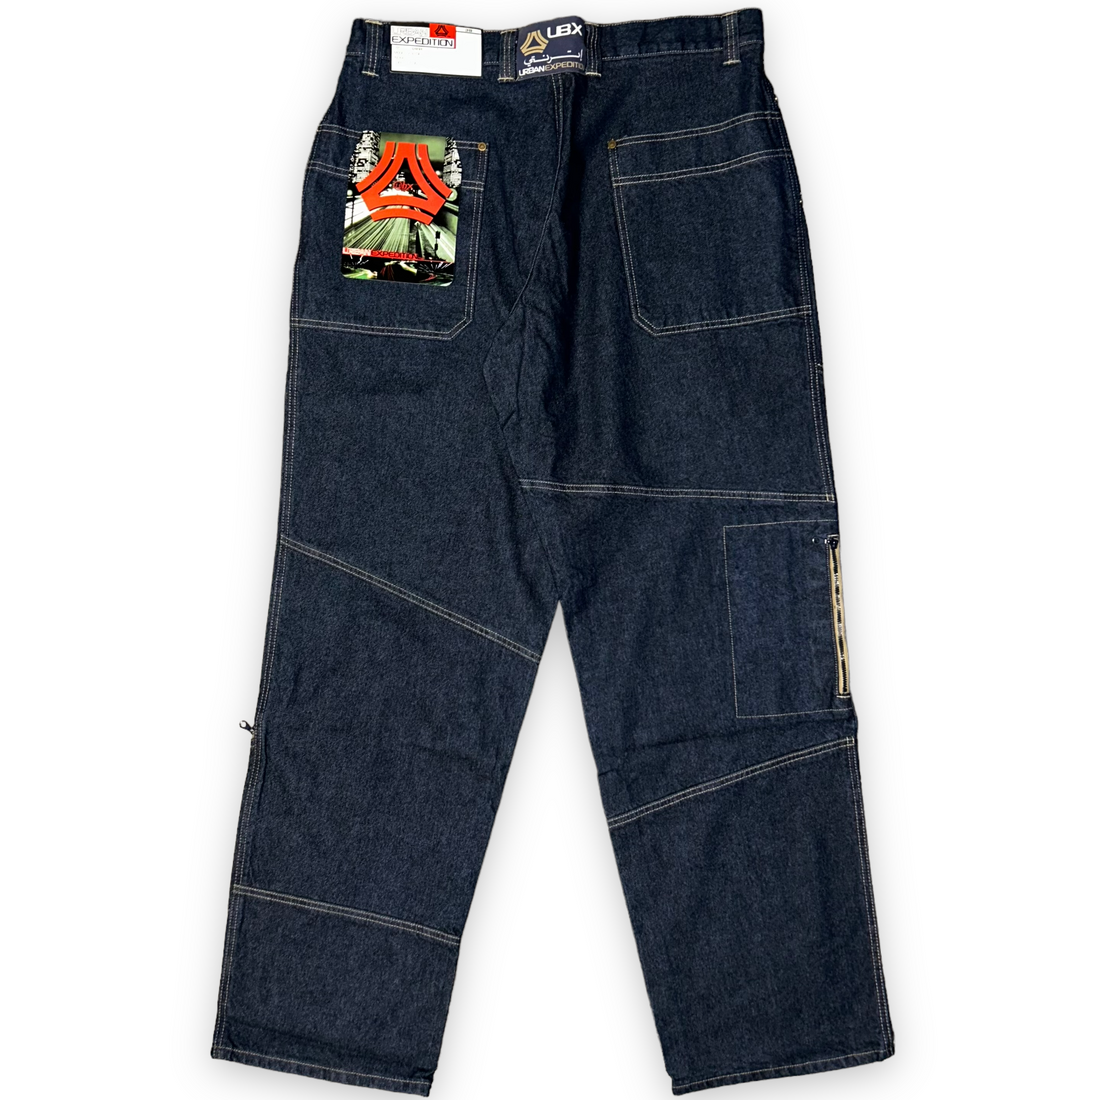 Baggy jeans Urban Expedition UBX vintage  (28 USA  XS)